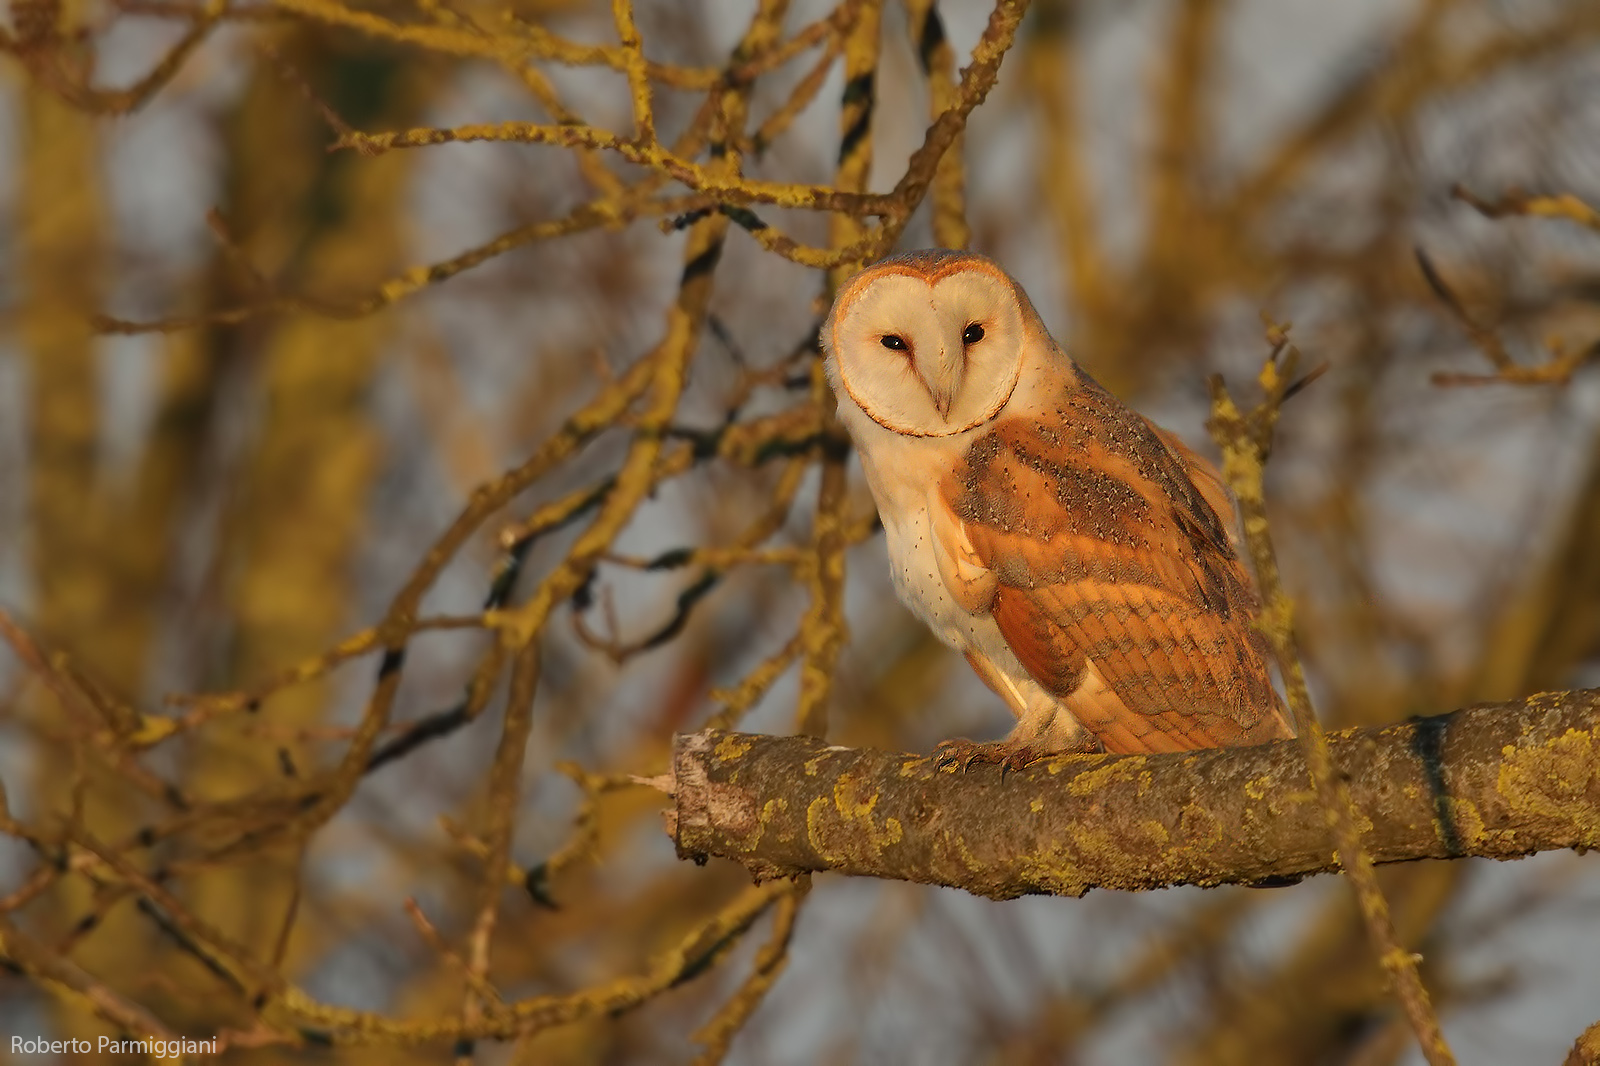 The camouflage of the barn owl...